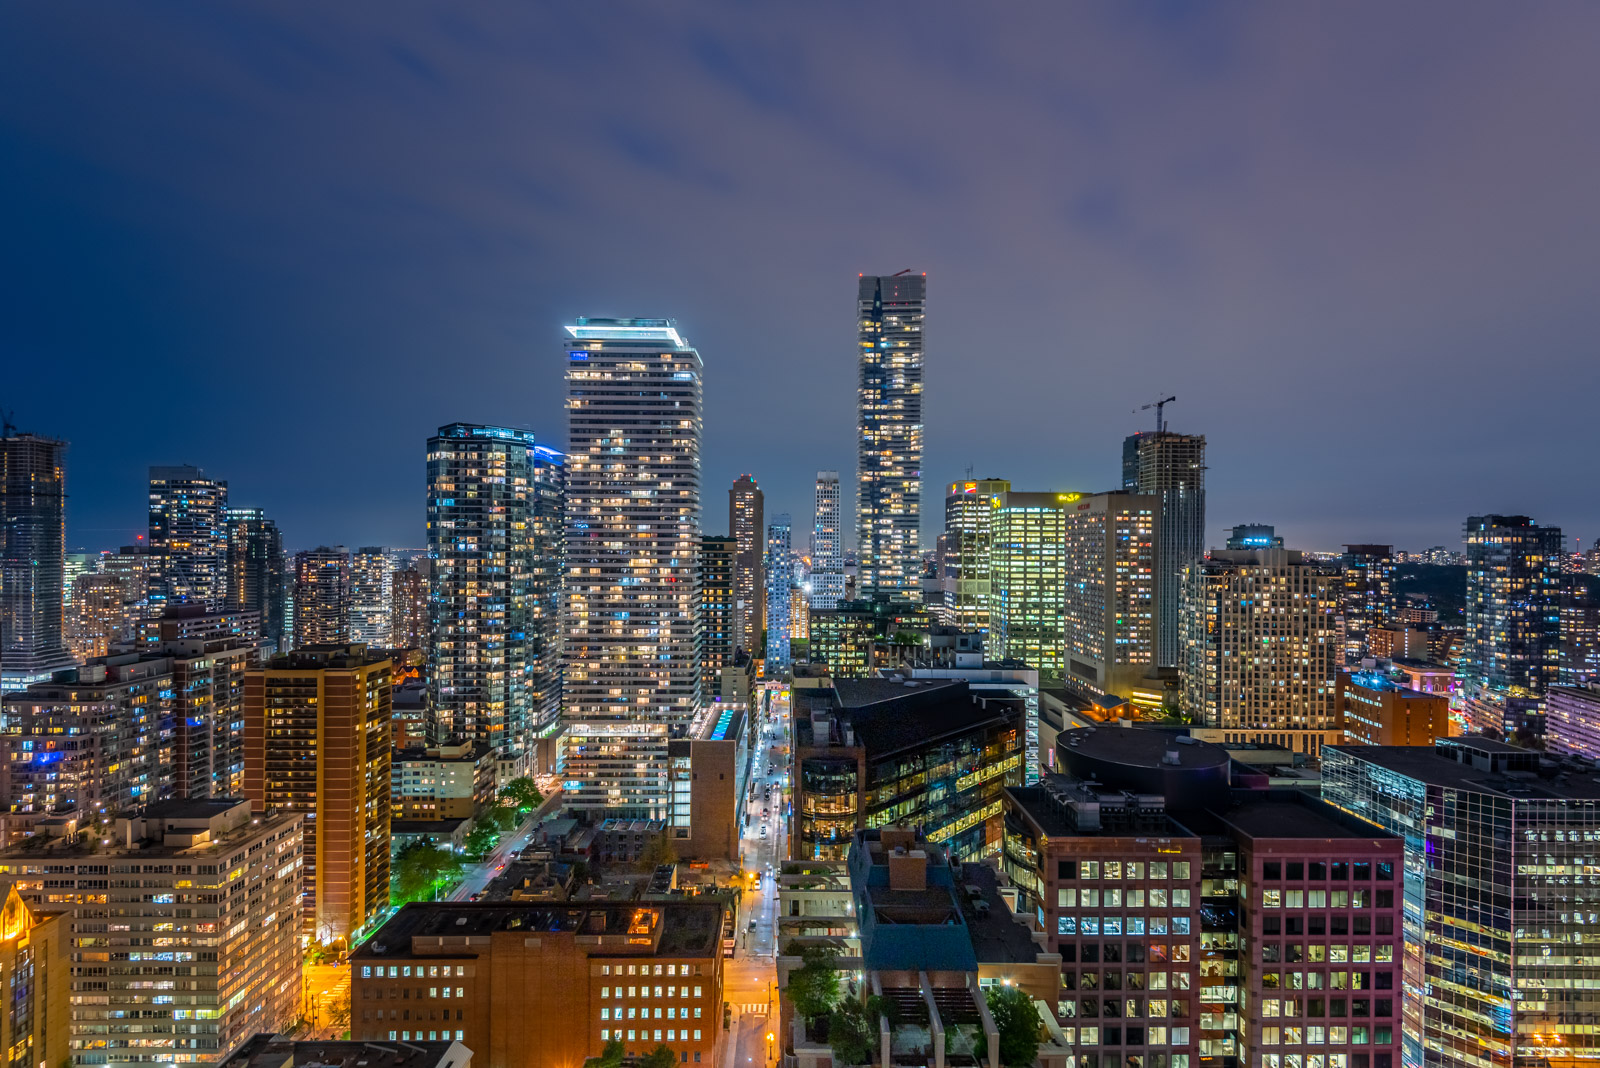 Toronto skyline at night to show selling homes and areas of service.